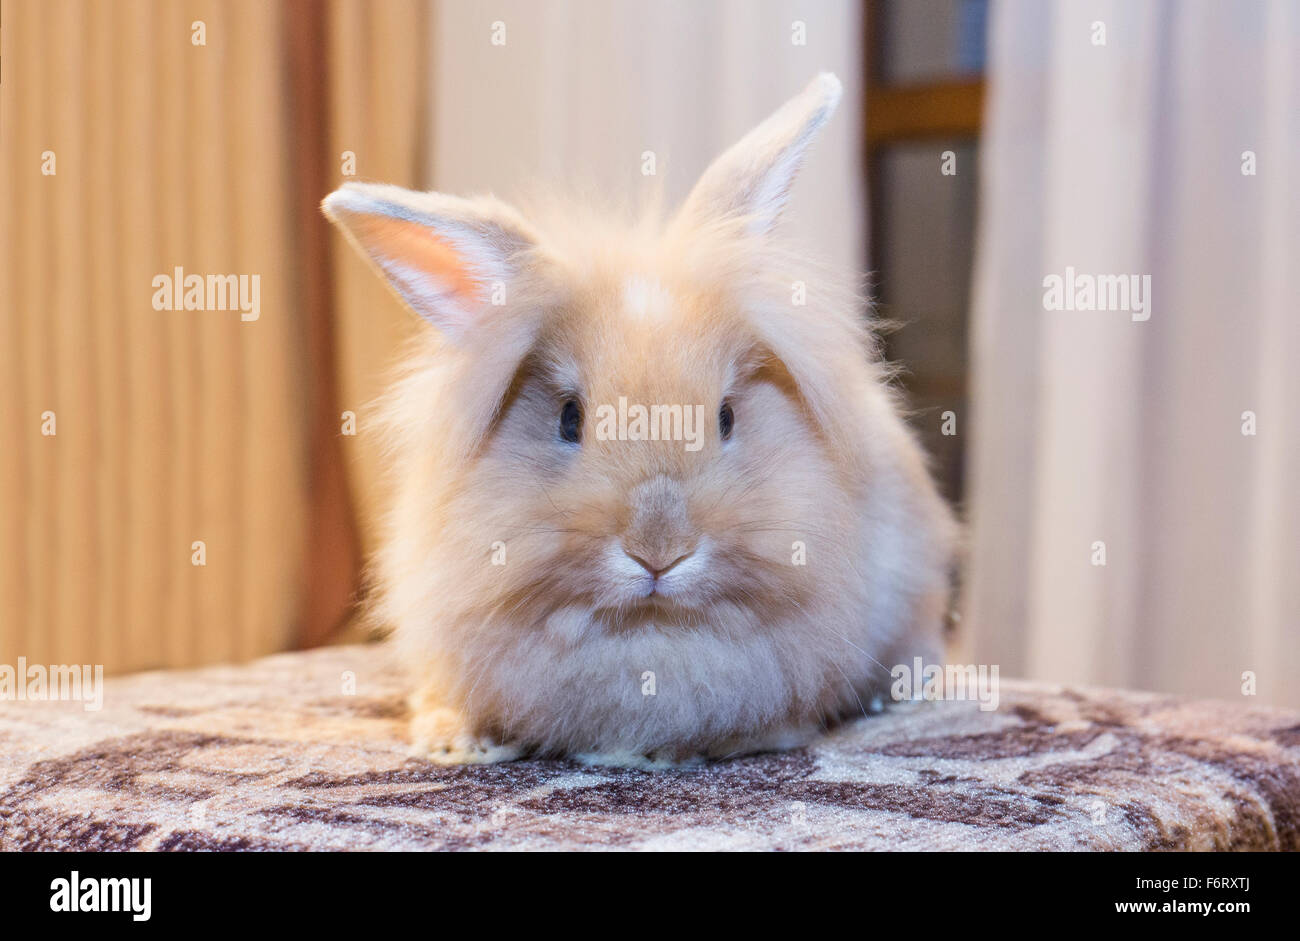 Golden rabbit sitting on a home white sofa turning to look at the empty space. Stock Photo